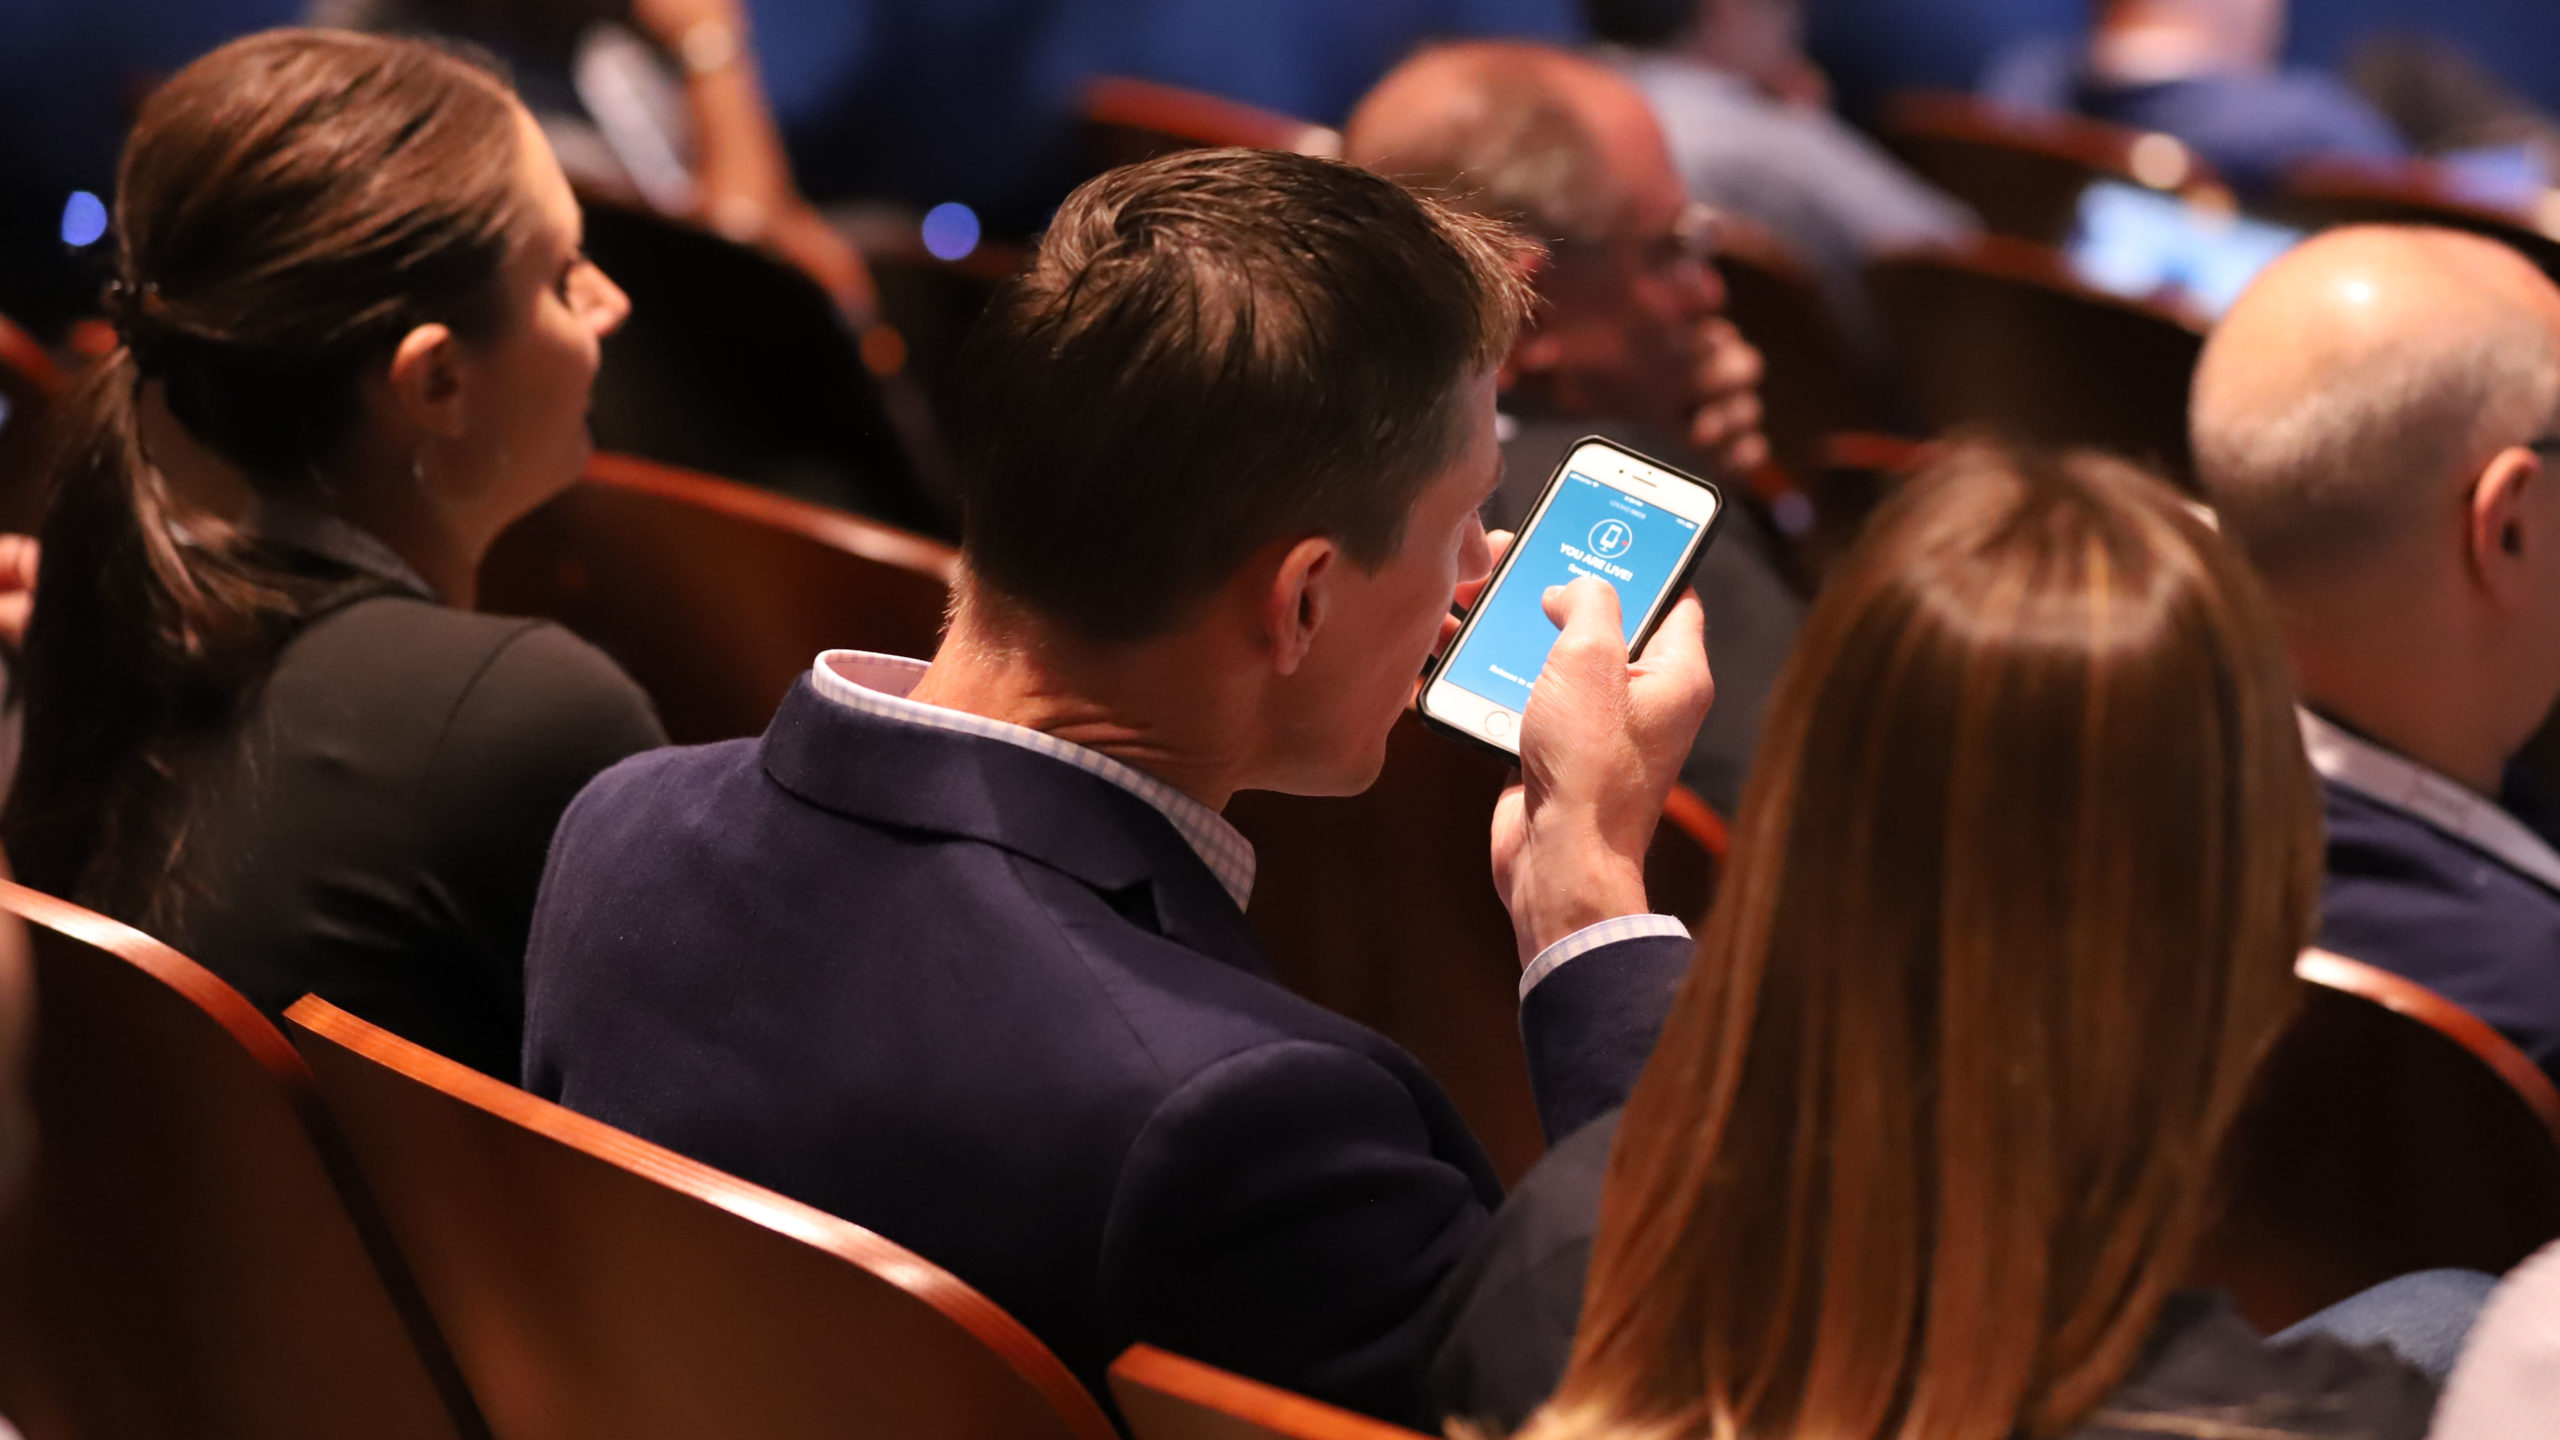 Event attendee uses Crowd Mic app to speak